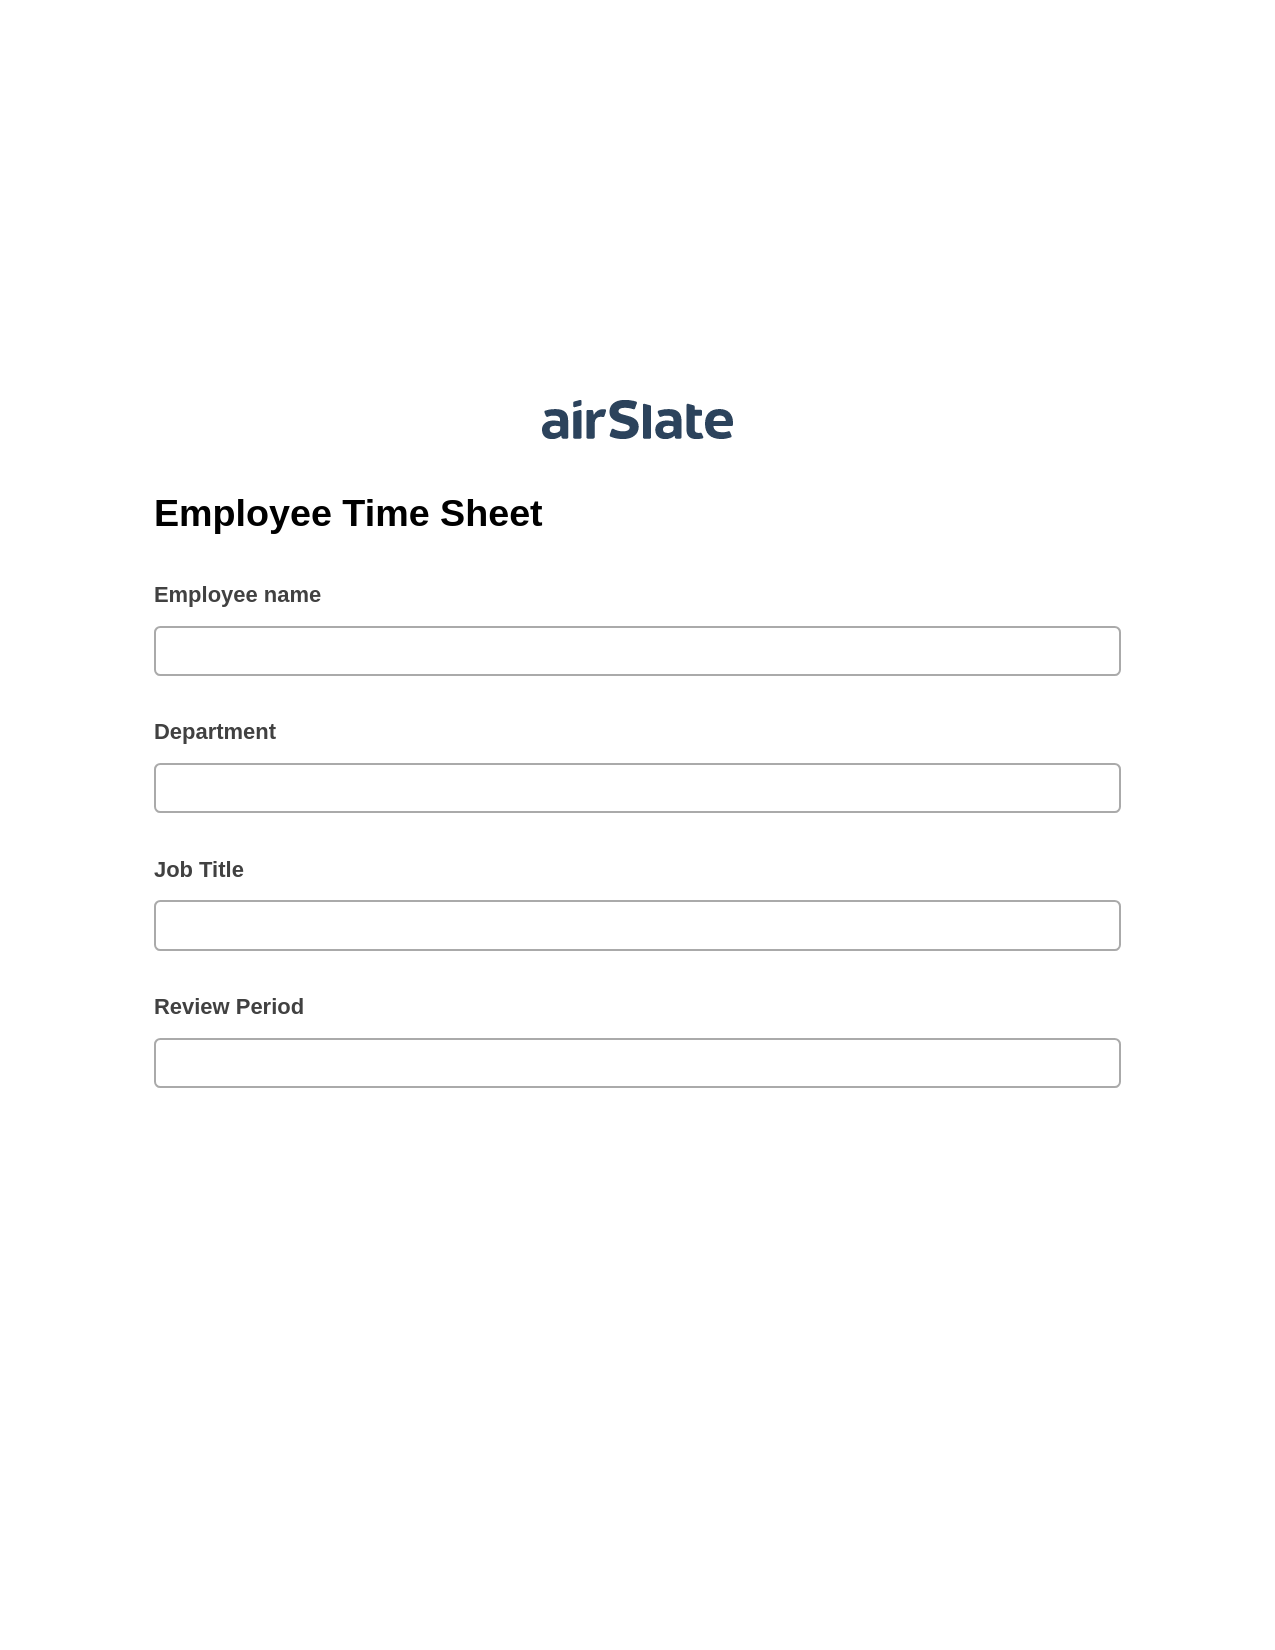 Multirole Employee Time Sheet Pre-fill from another Slate Bot, Rename Slate Bot, Archive to OneDrive Bot